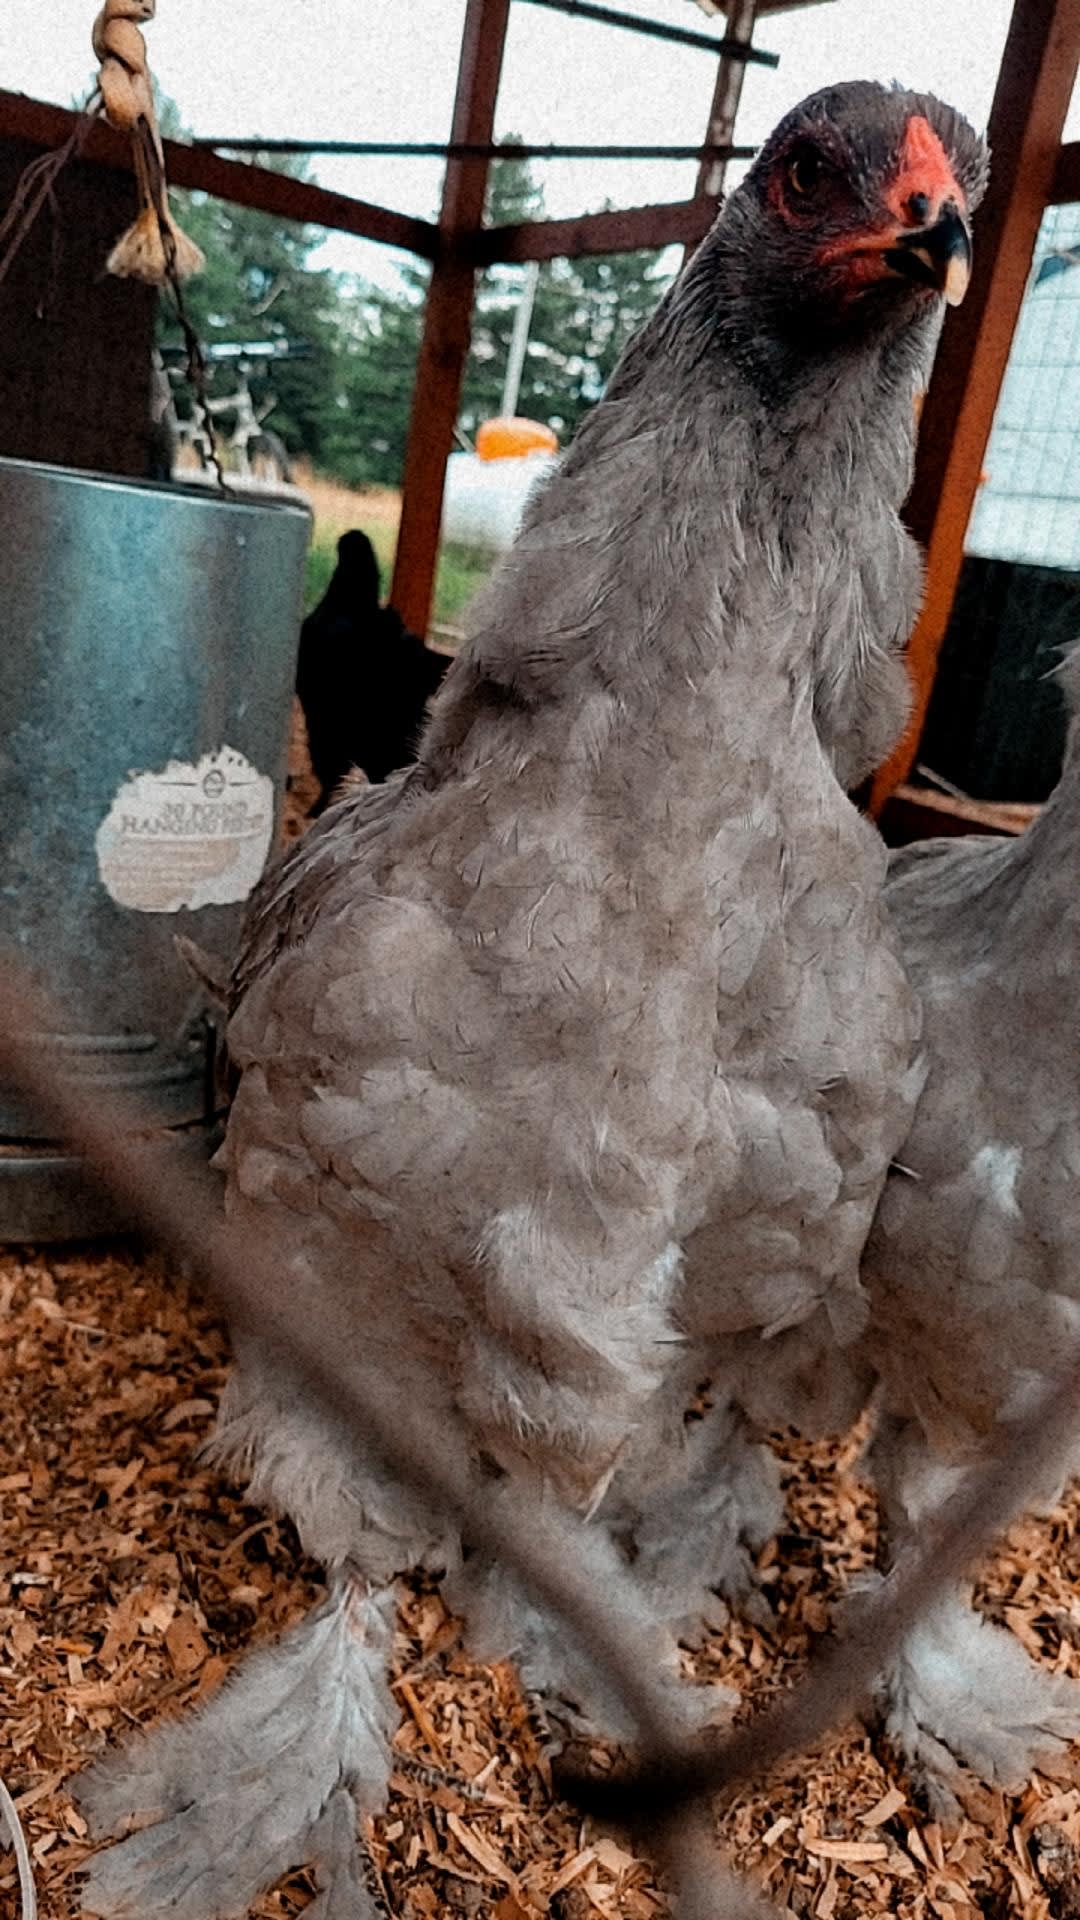 One of our chickens, Boots